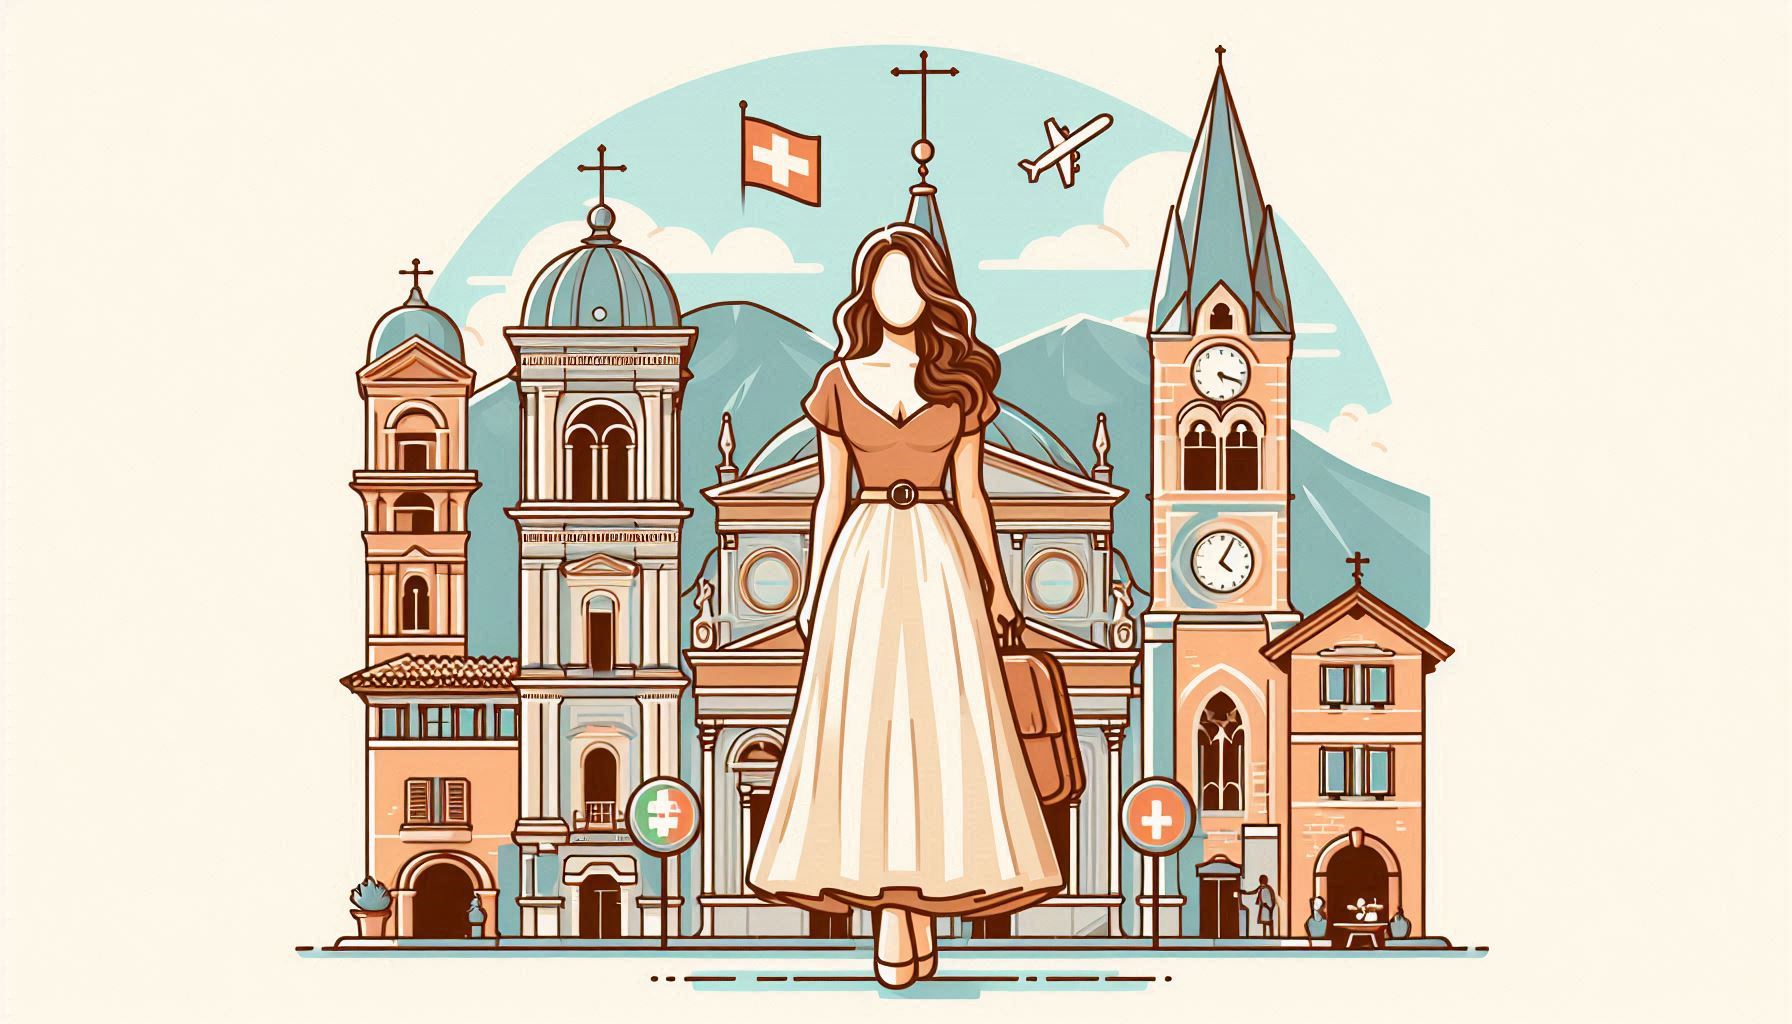 What Is The Dress Code For Visiting Churches In European Countries, Like Italy Or Switzerland?